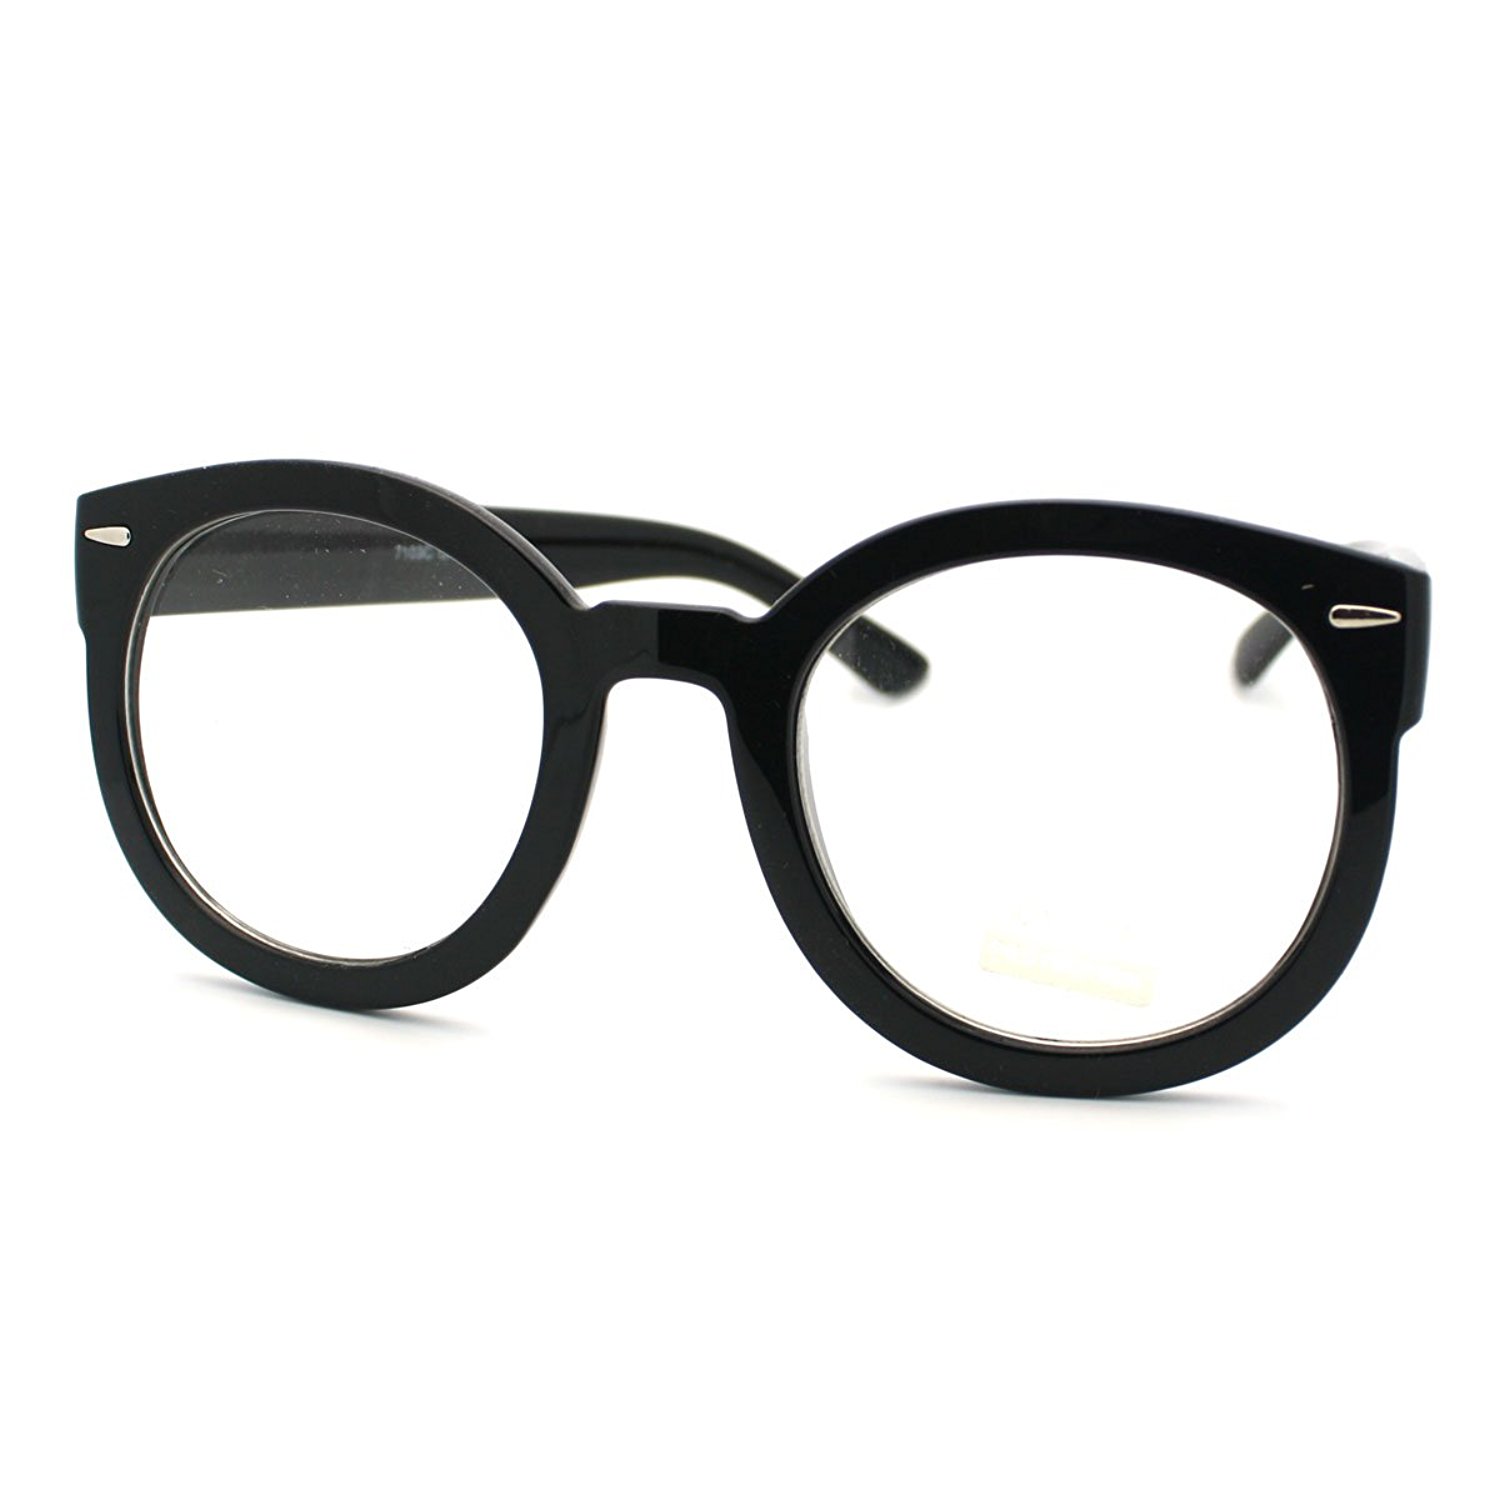 Amazon.com: Black Oversized Round Thick Horn Rim Clear Lens Fashion ...